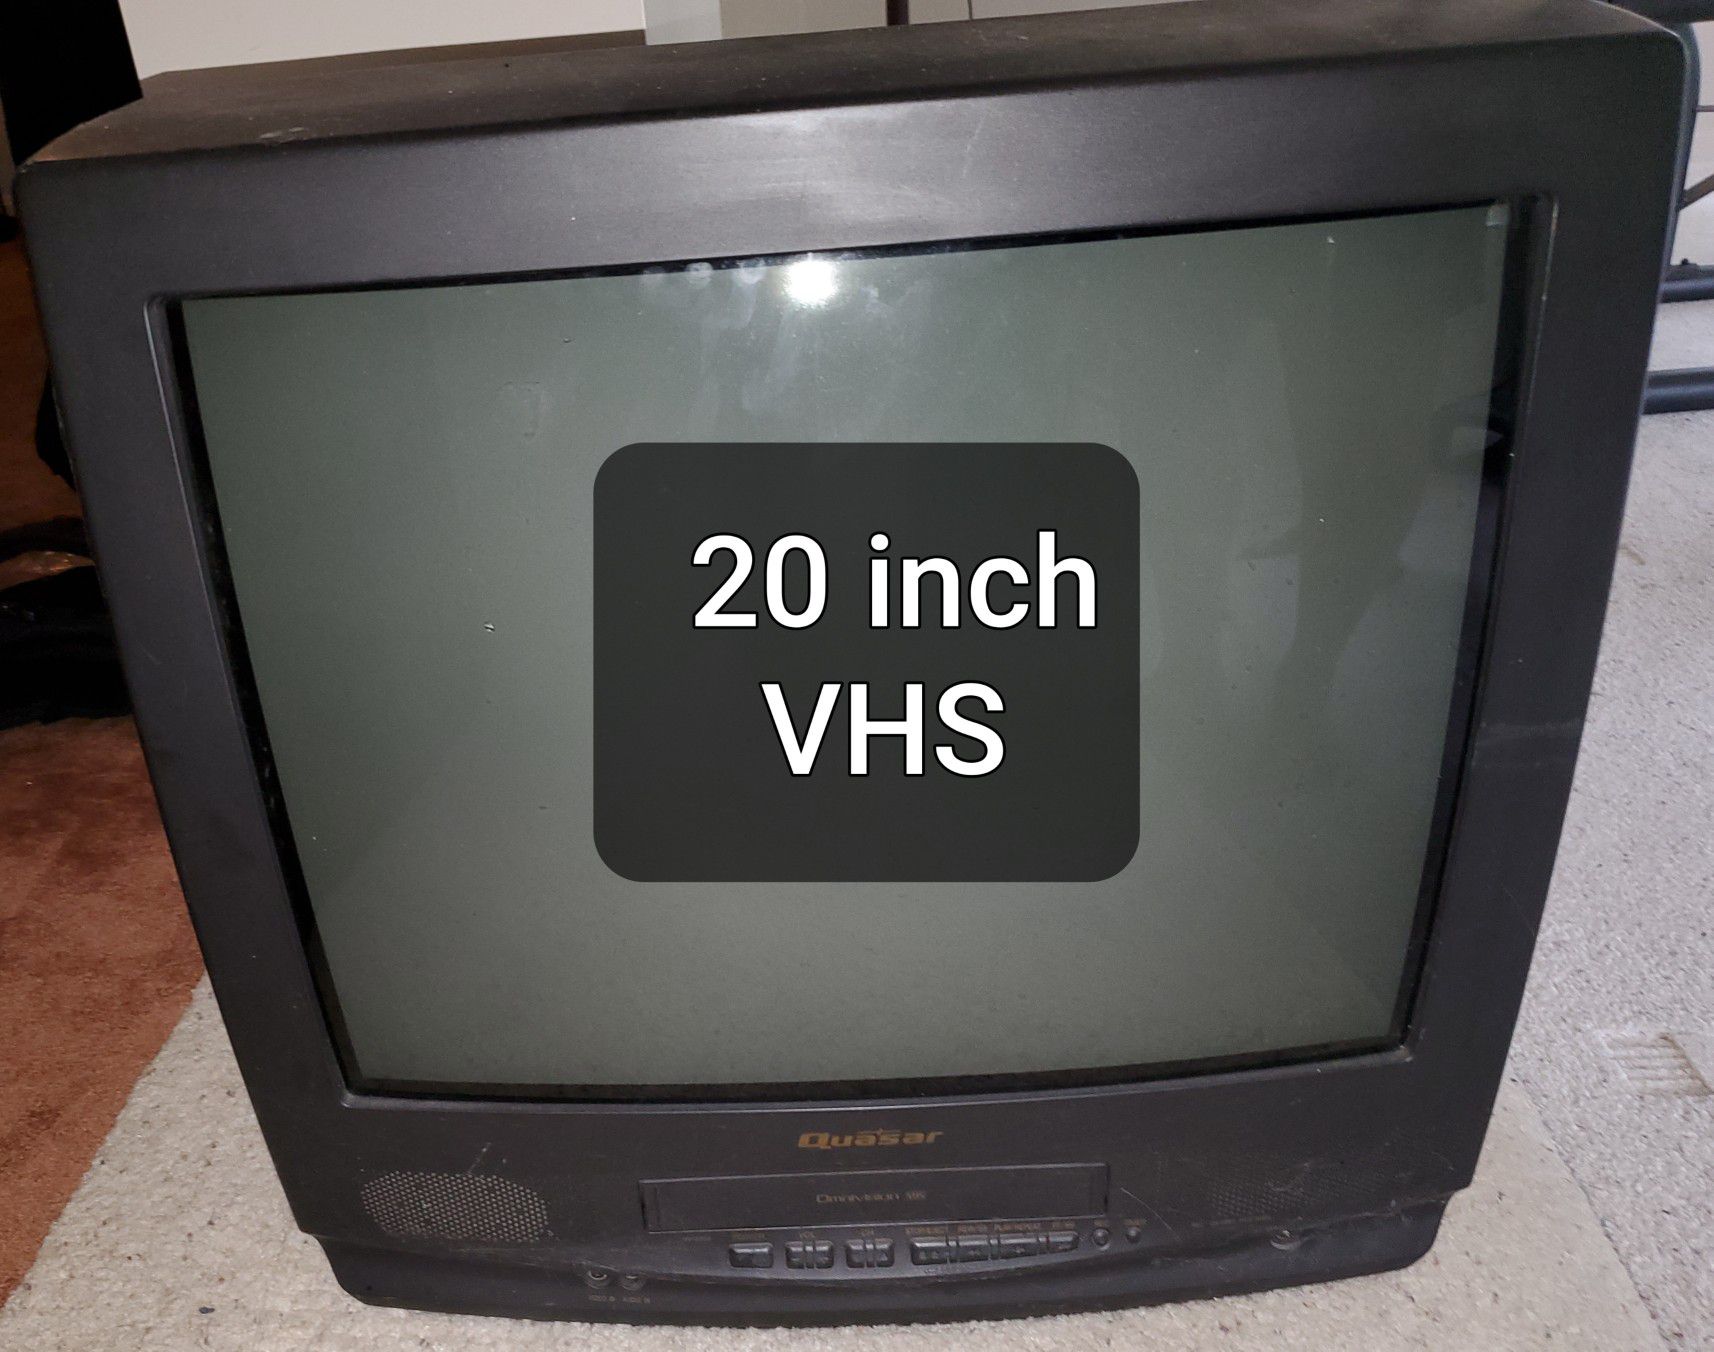 VHS TV 20 inch and these cassettes